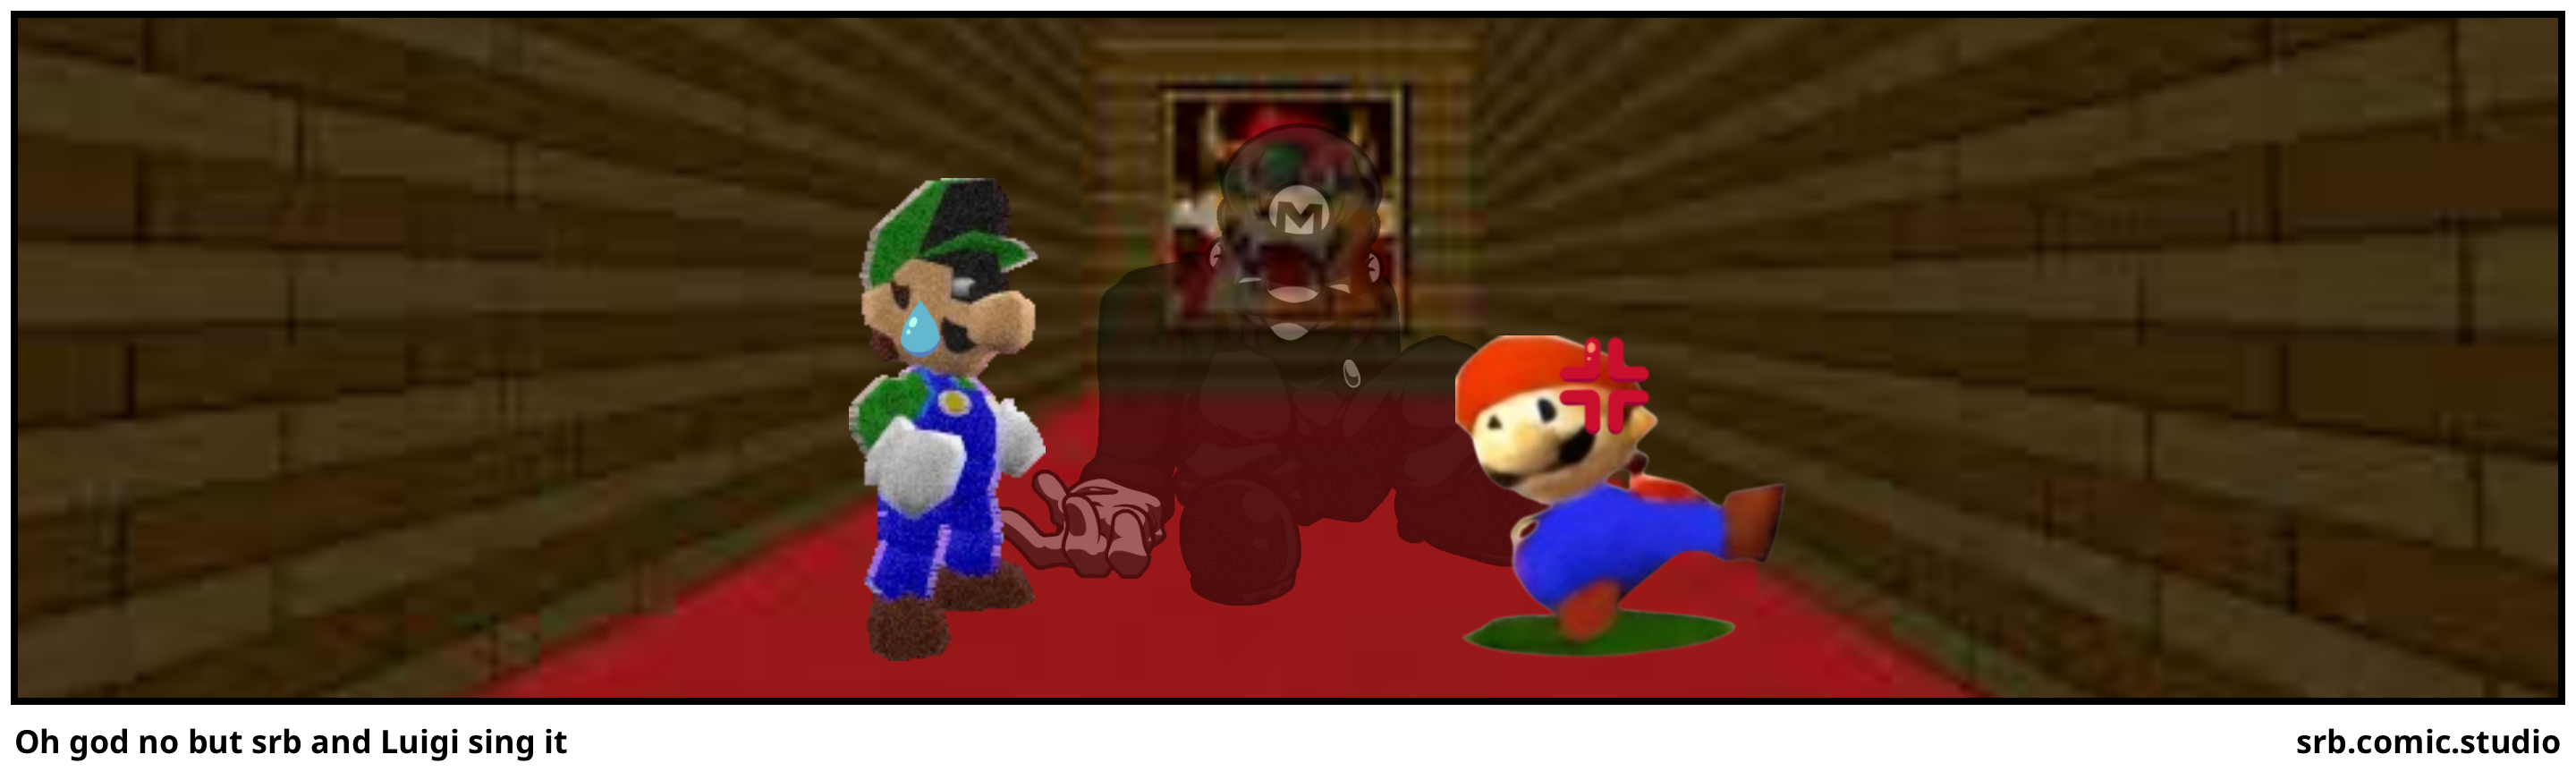 Oh god no but srb and Luigi sing it